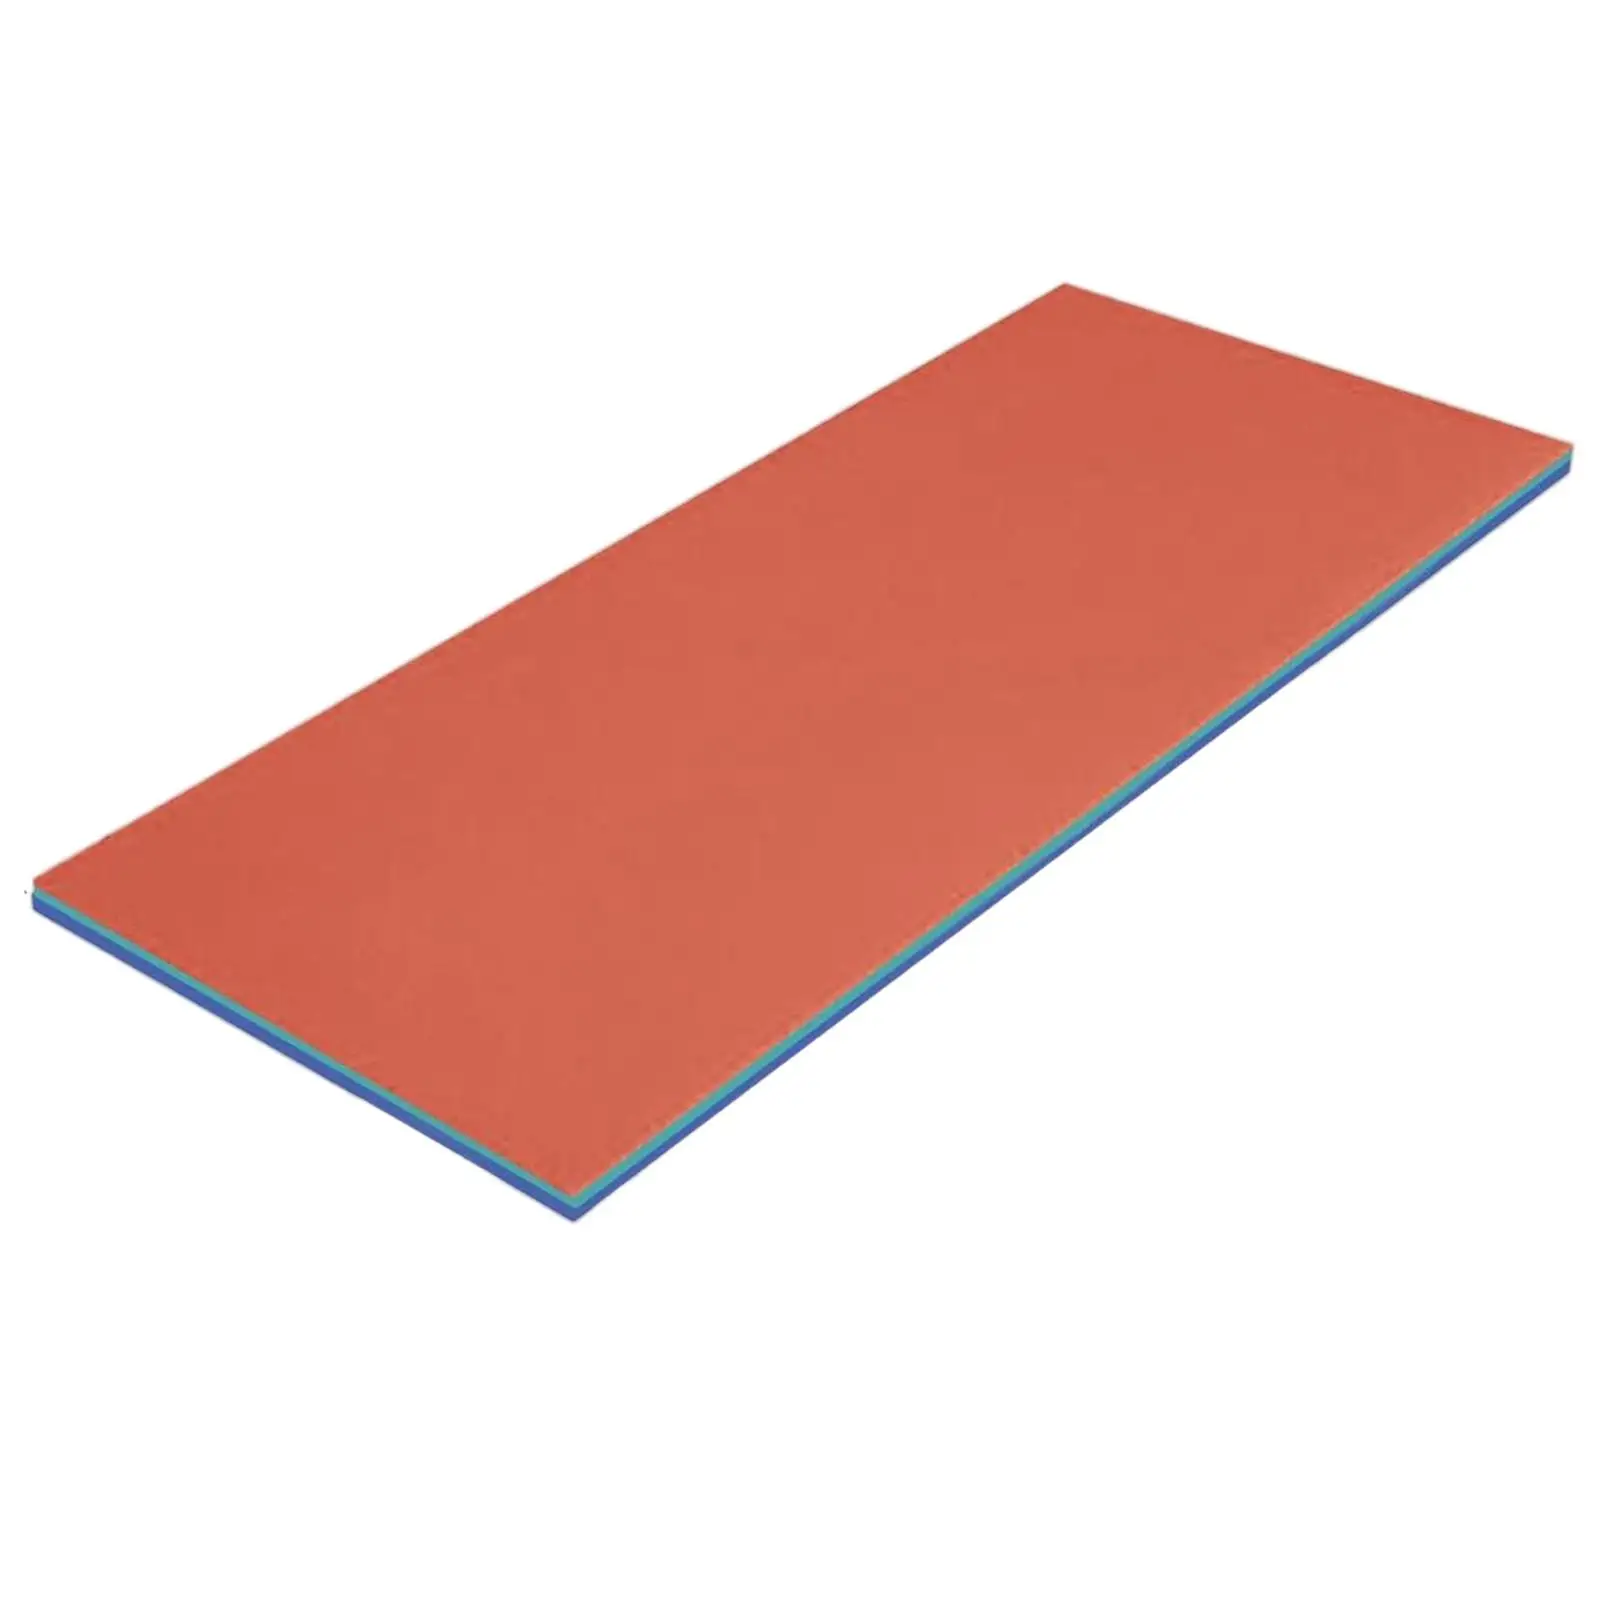 Water Float Mat Summer Water Recreation Durable Play Unsinkable Floats Mattress for Boating Beach Party Swimming Pool Adults